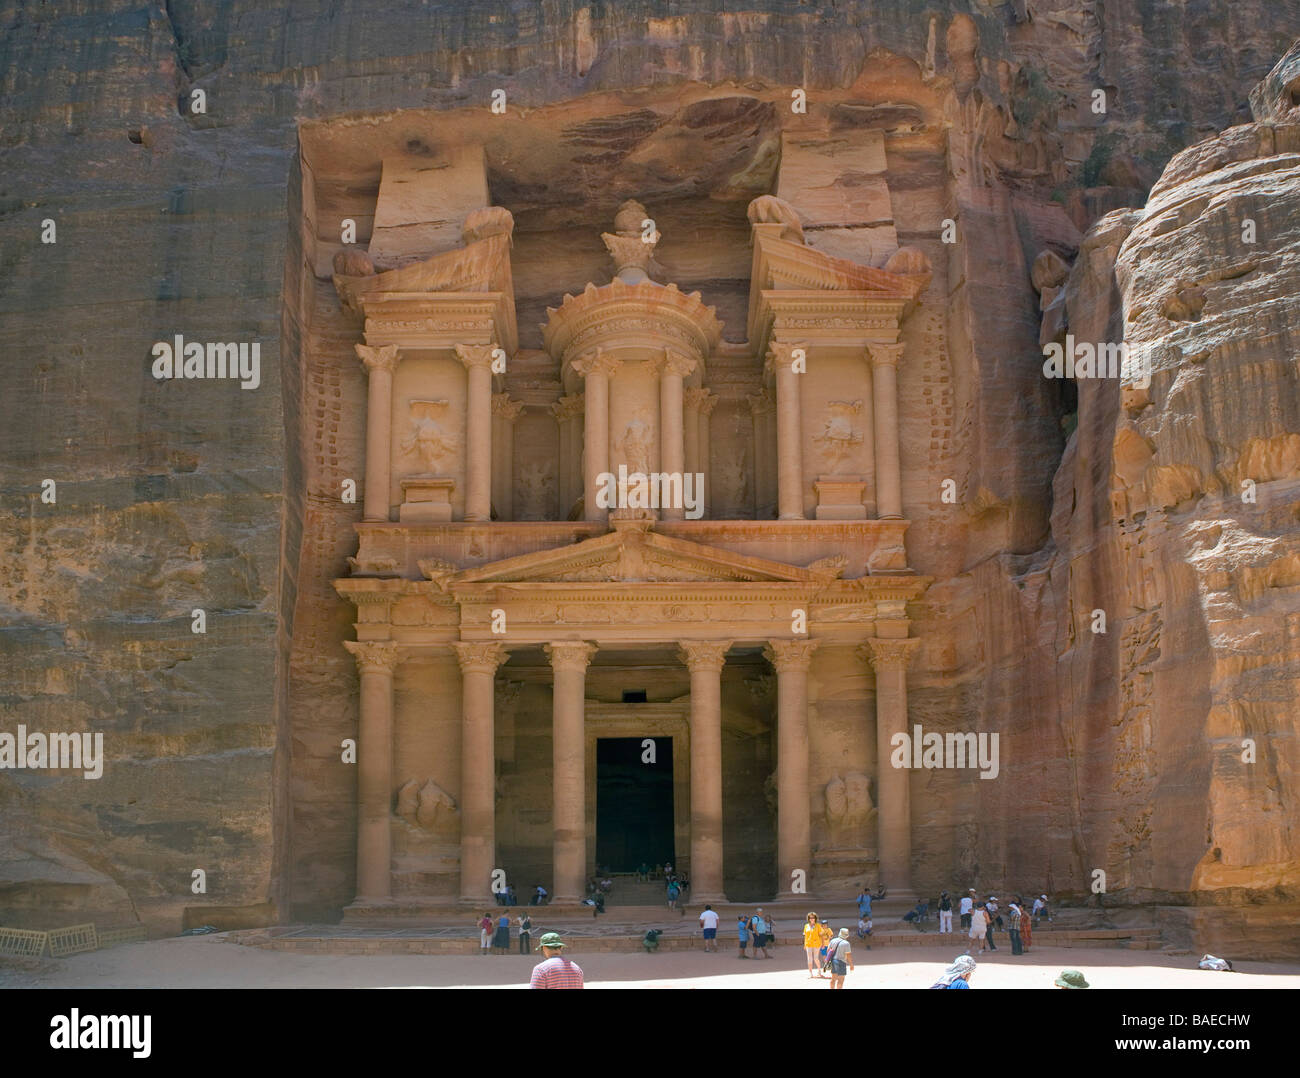 El Khazneh, The Treasury, the most famous building in the ancient city of Petra, Jordan Stock Photo